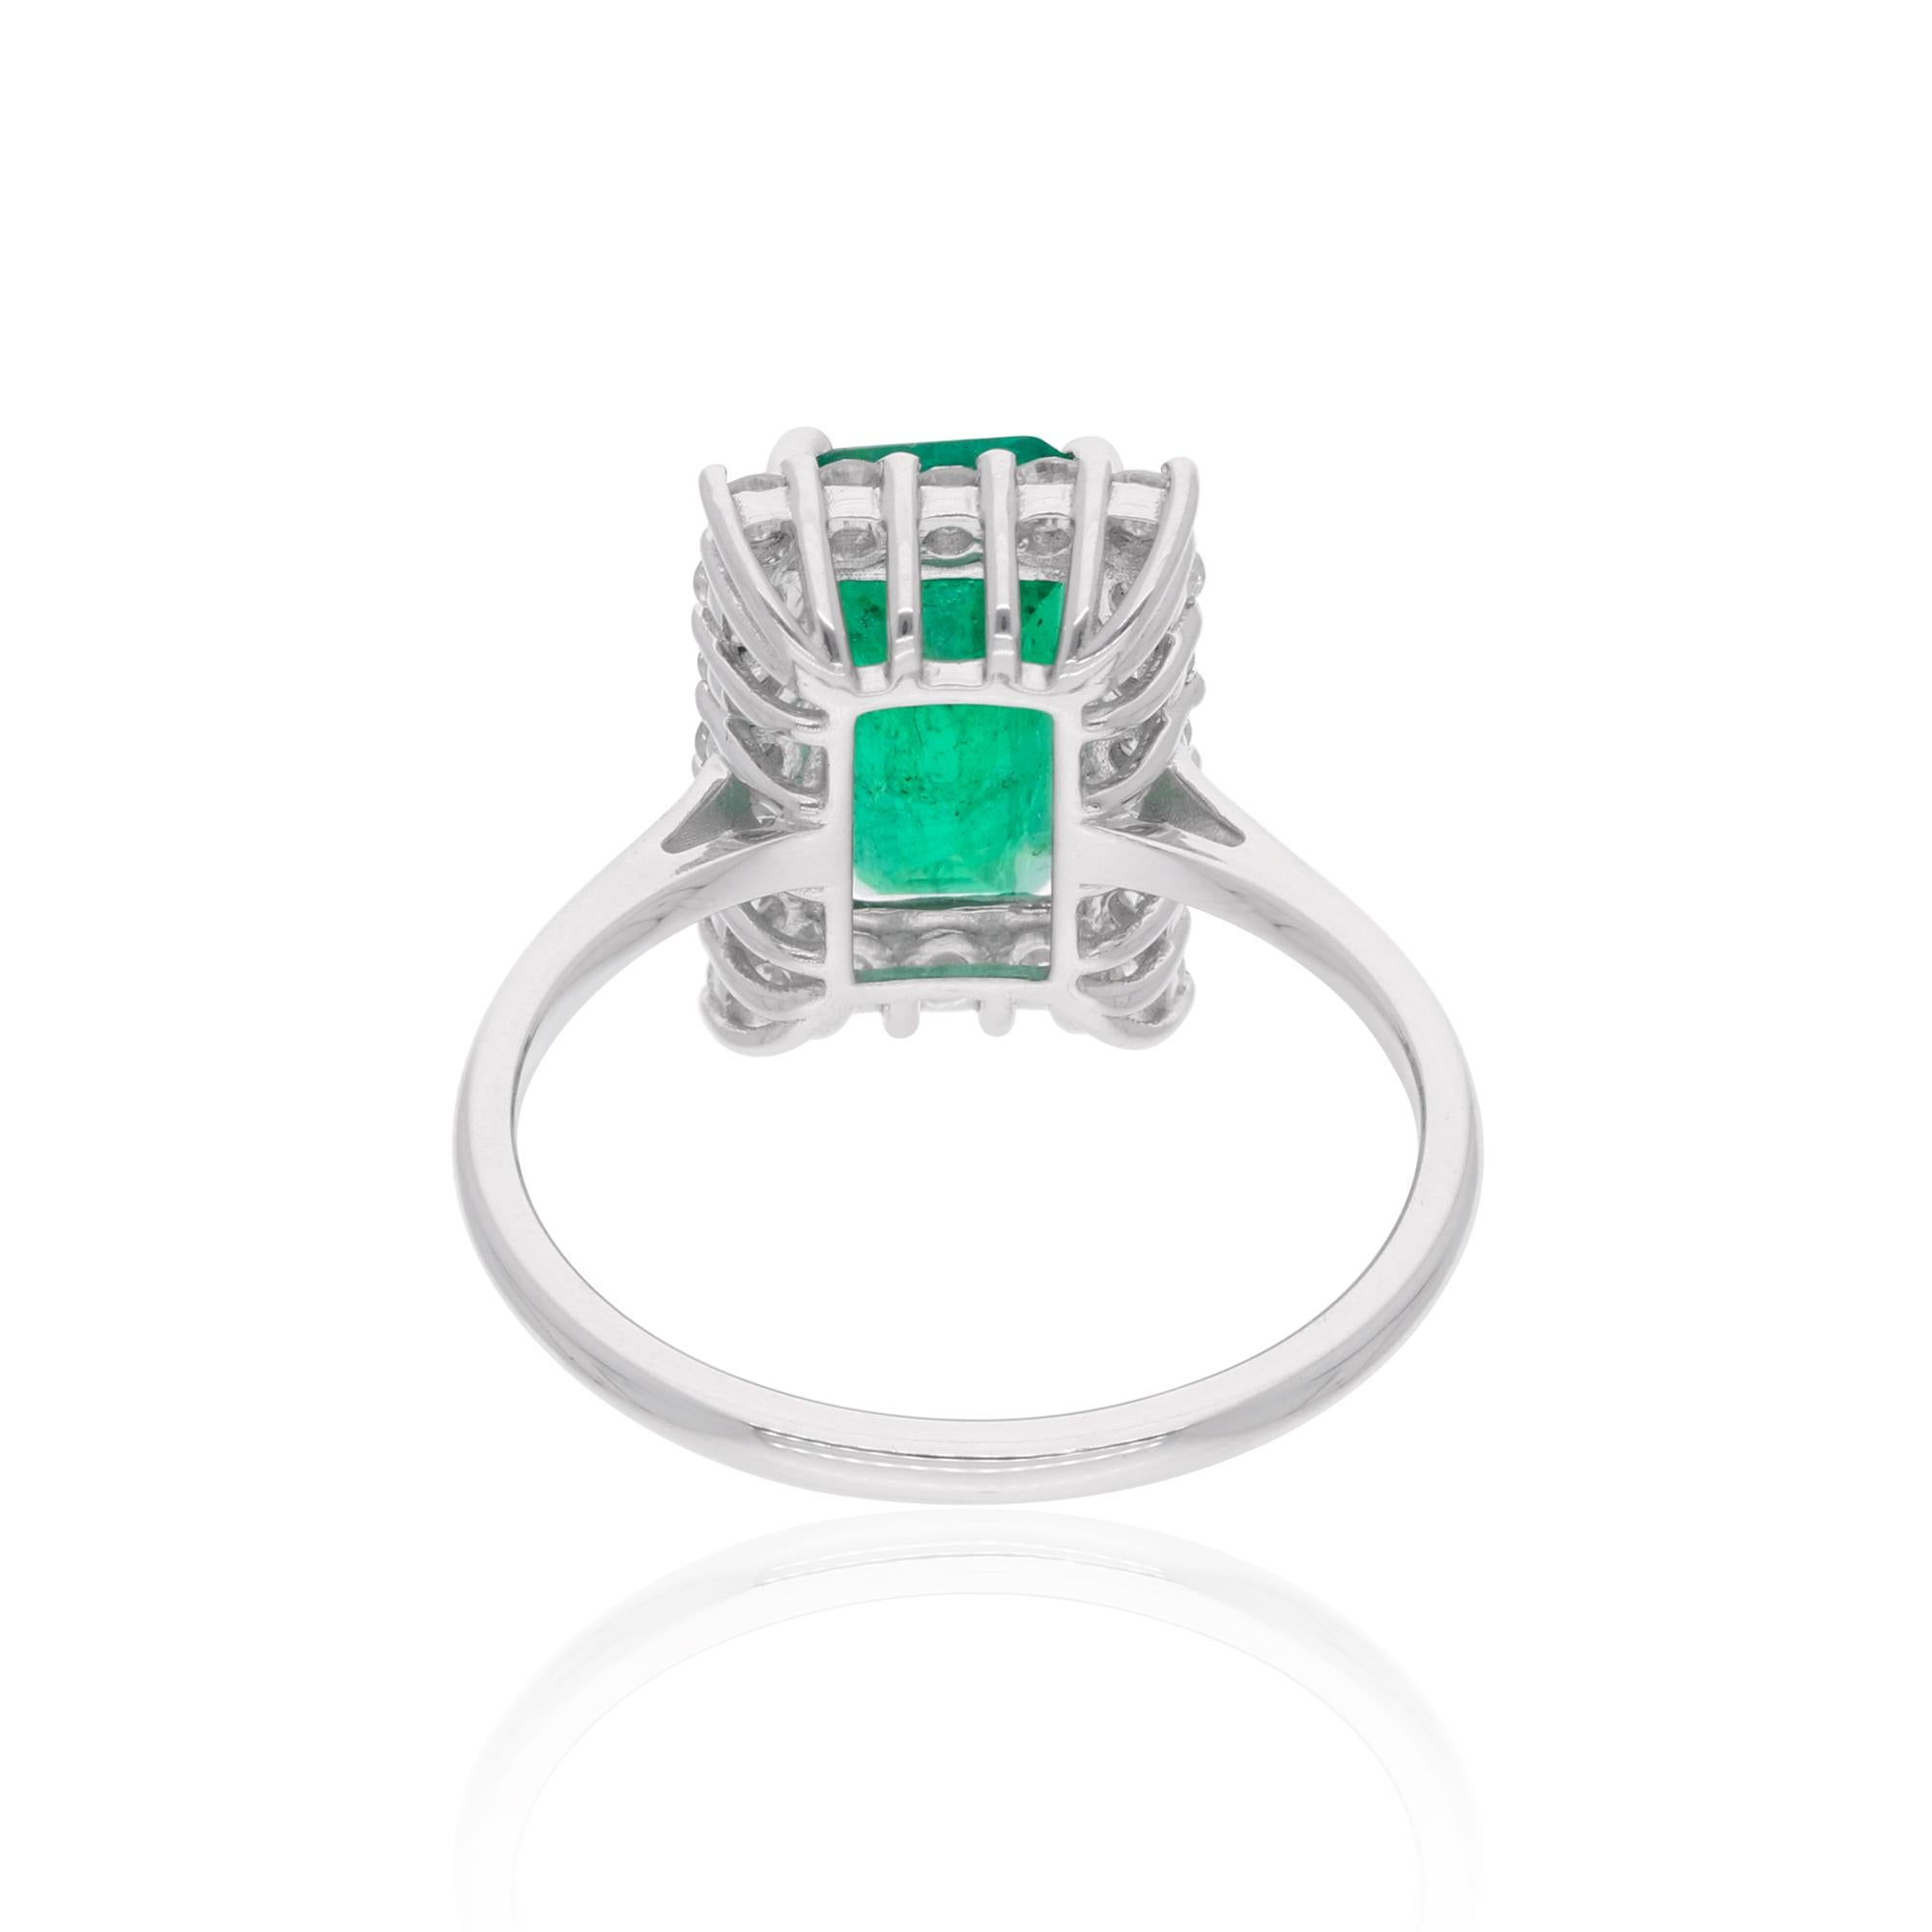 Indulge in the timeless elegance of this stunning Emerald Diamond Ring. With its classic design and exquisite craftsmanship, this ring is sure to become a cherished addition to any jewelry collection. The ring is available in 10k/14k/18k, Rose